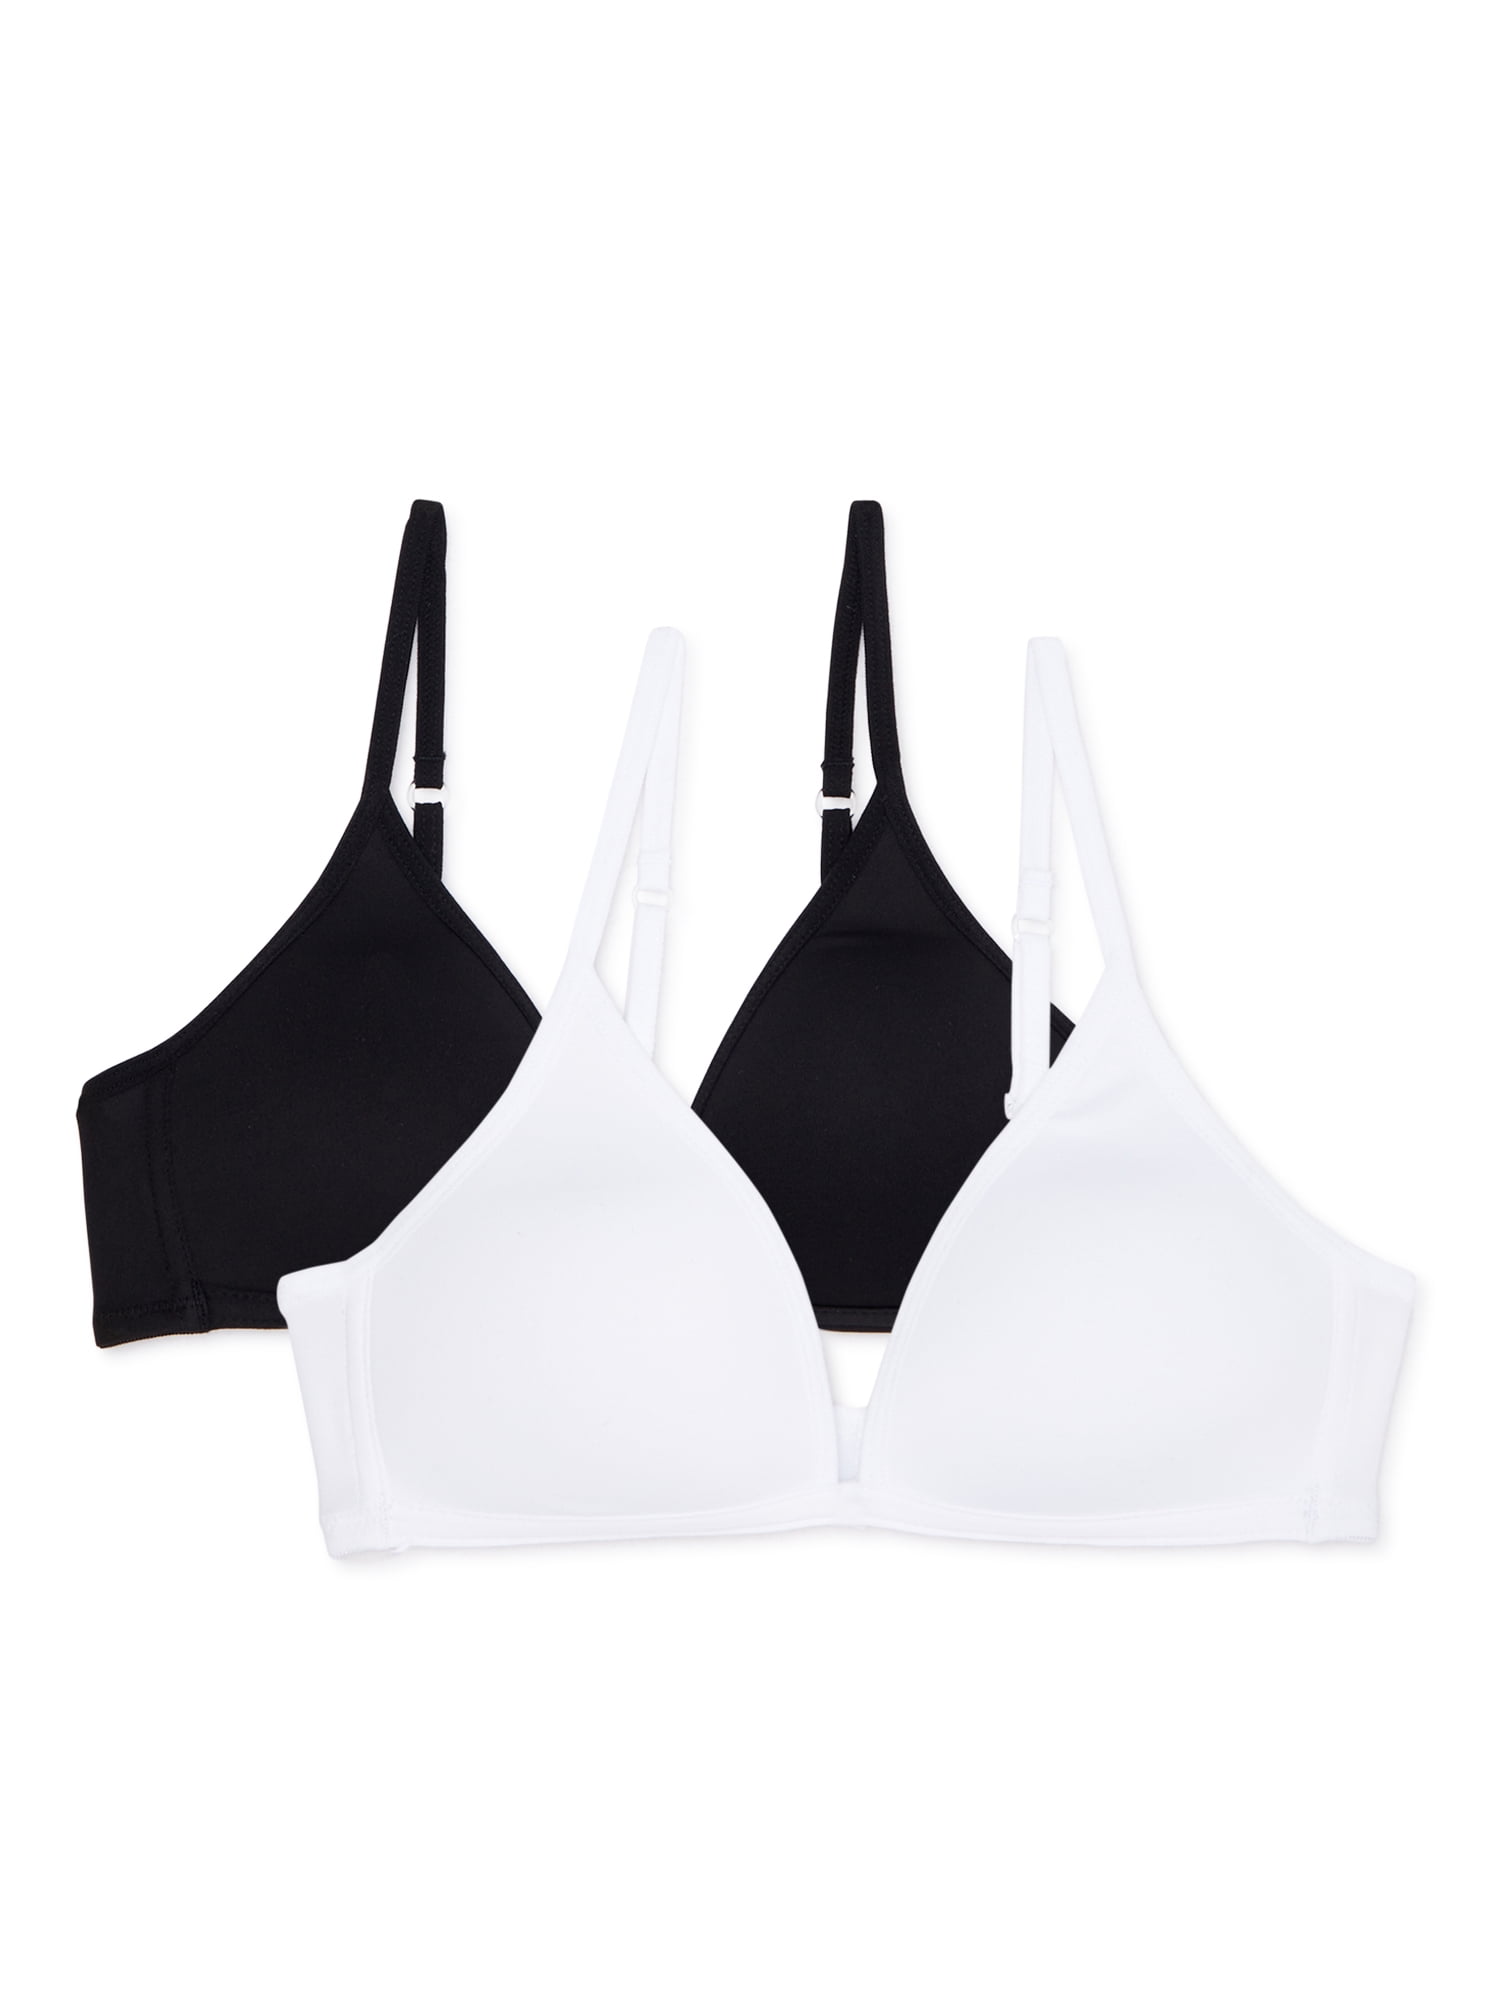 Maidenform Girls Molded Wireless Bras, 2-Pack, Sizes 30A-36A